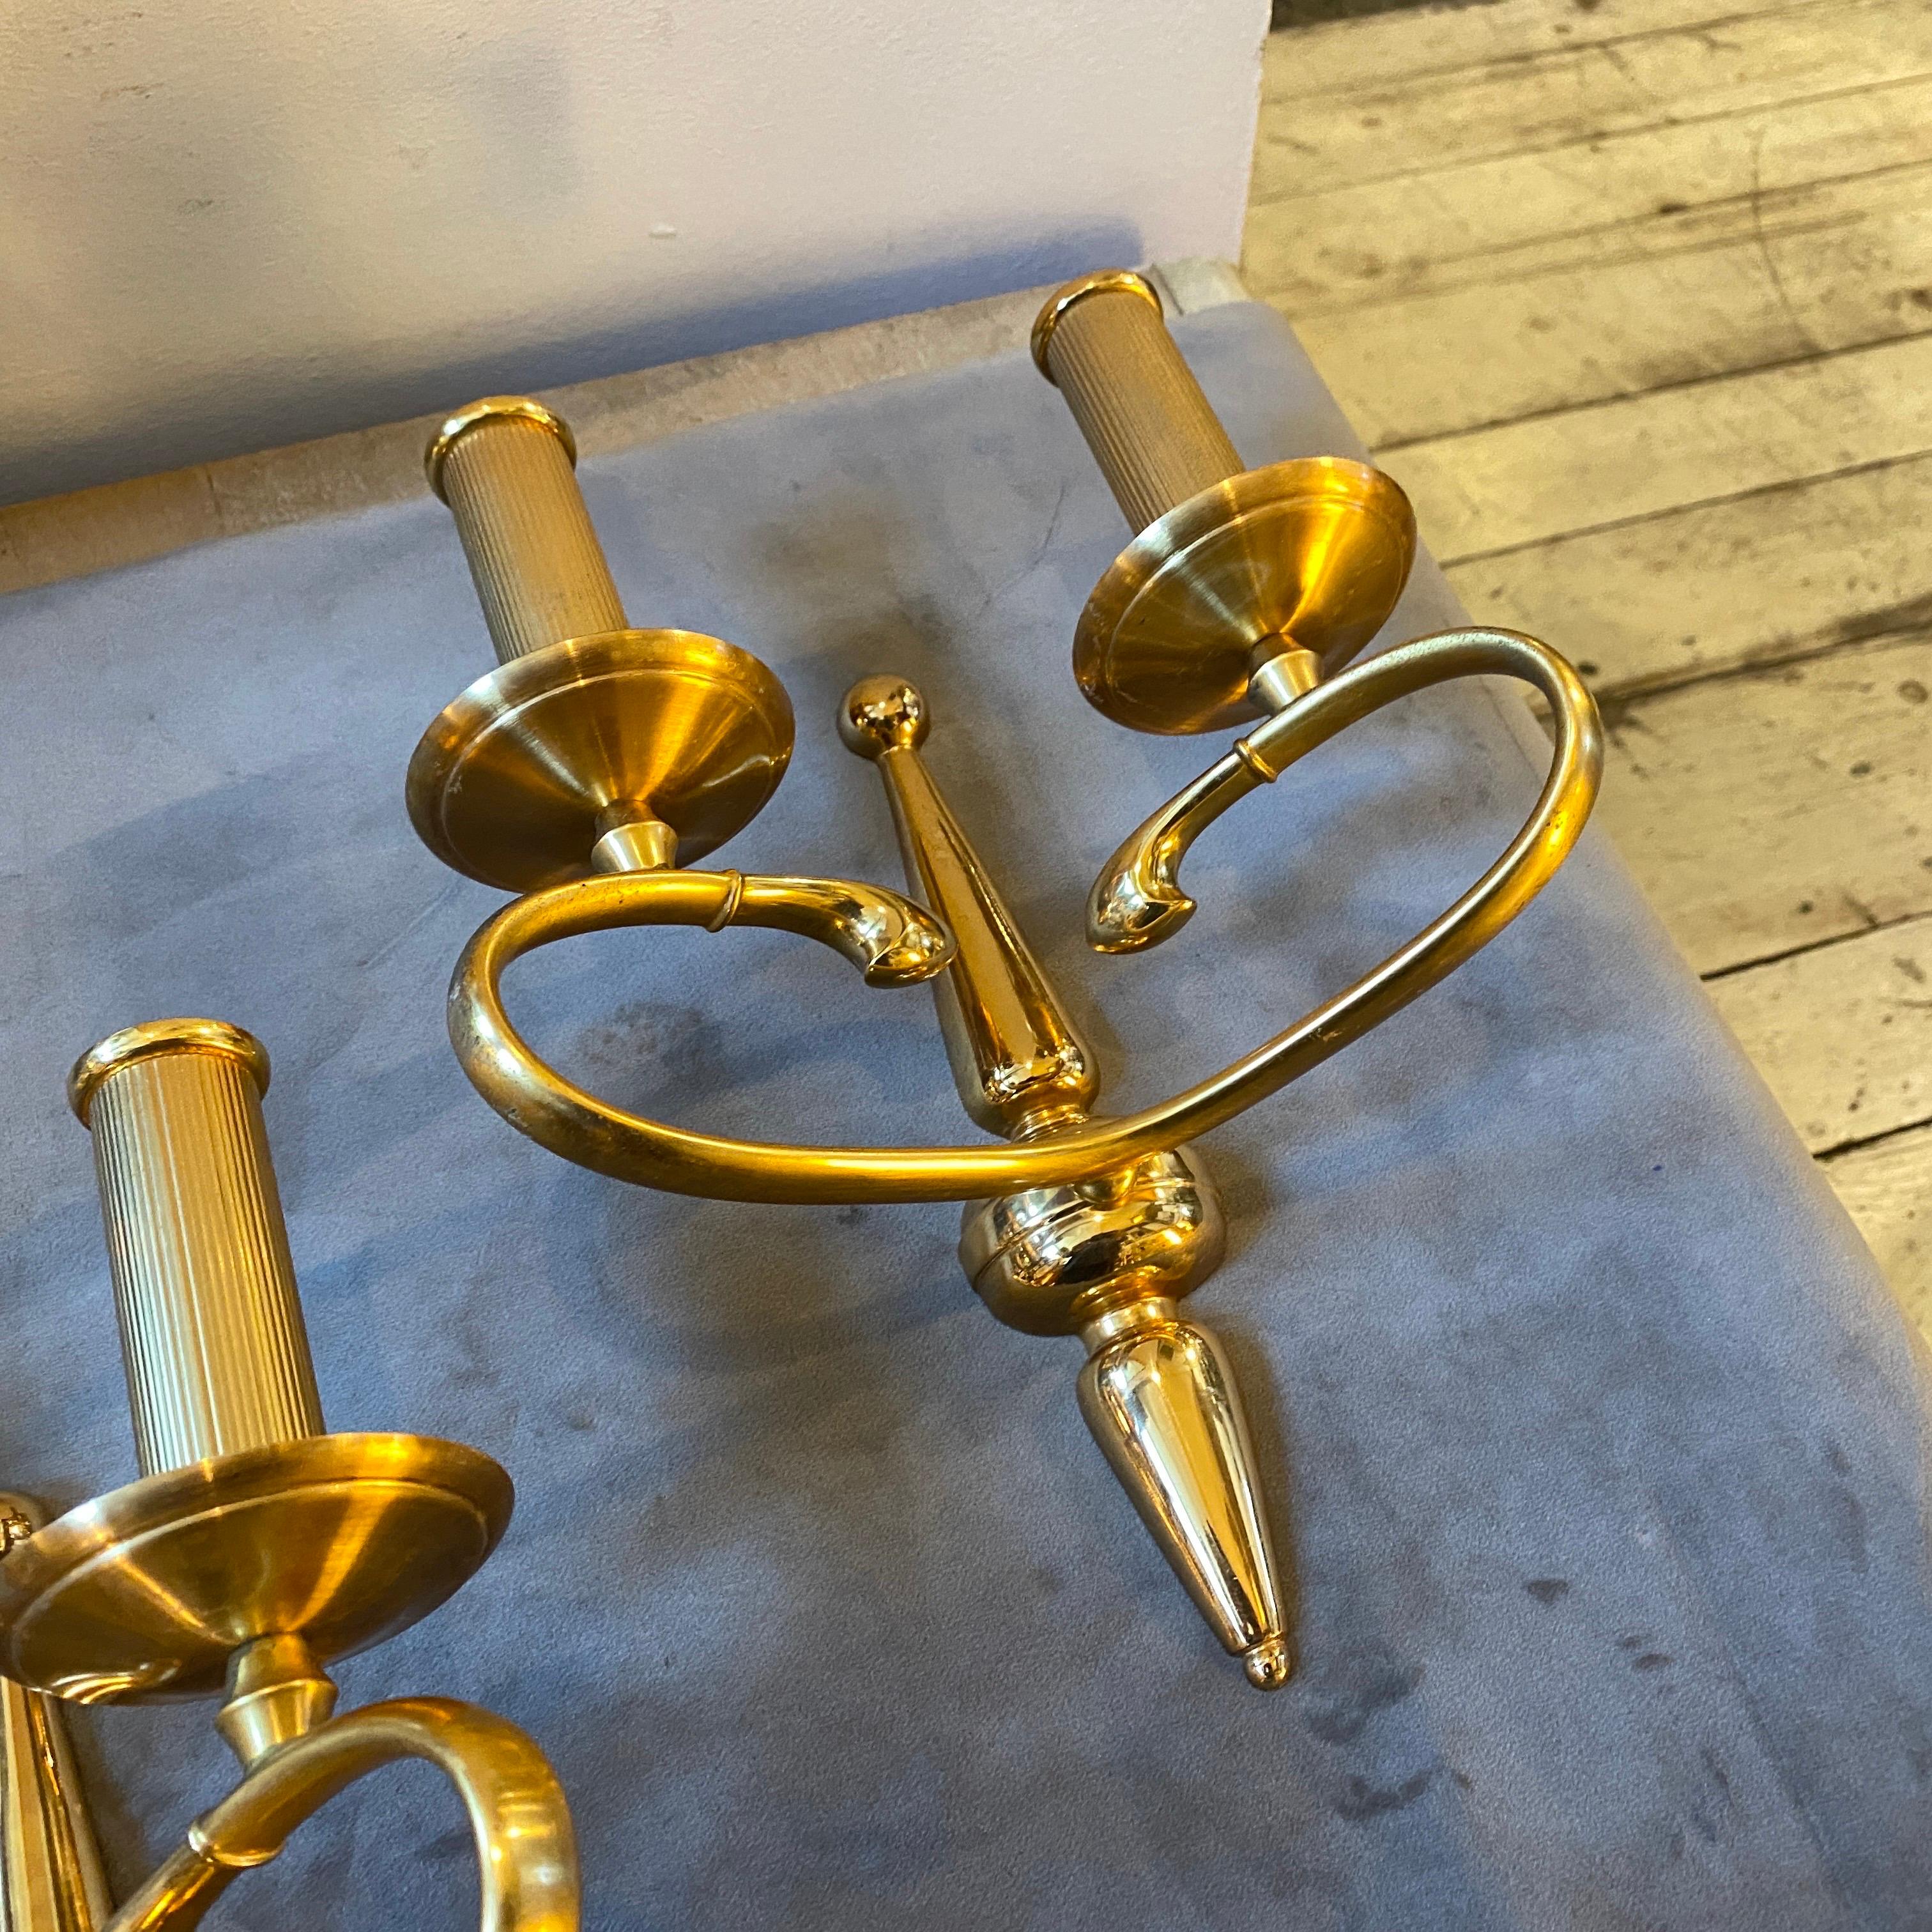 A pair of high quality solid brass italian wall sconces, they work 110-240 volts and need regular e14 bulbs. The brass original patina gives them a vibrant vintage look.